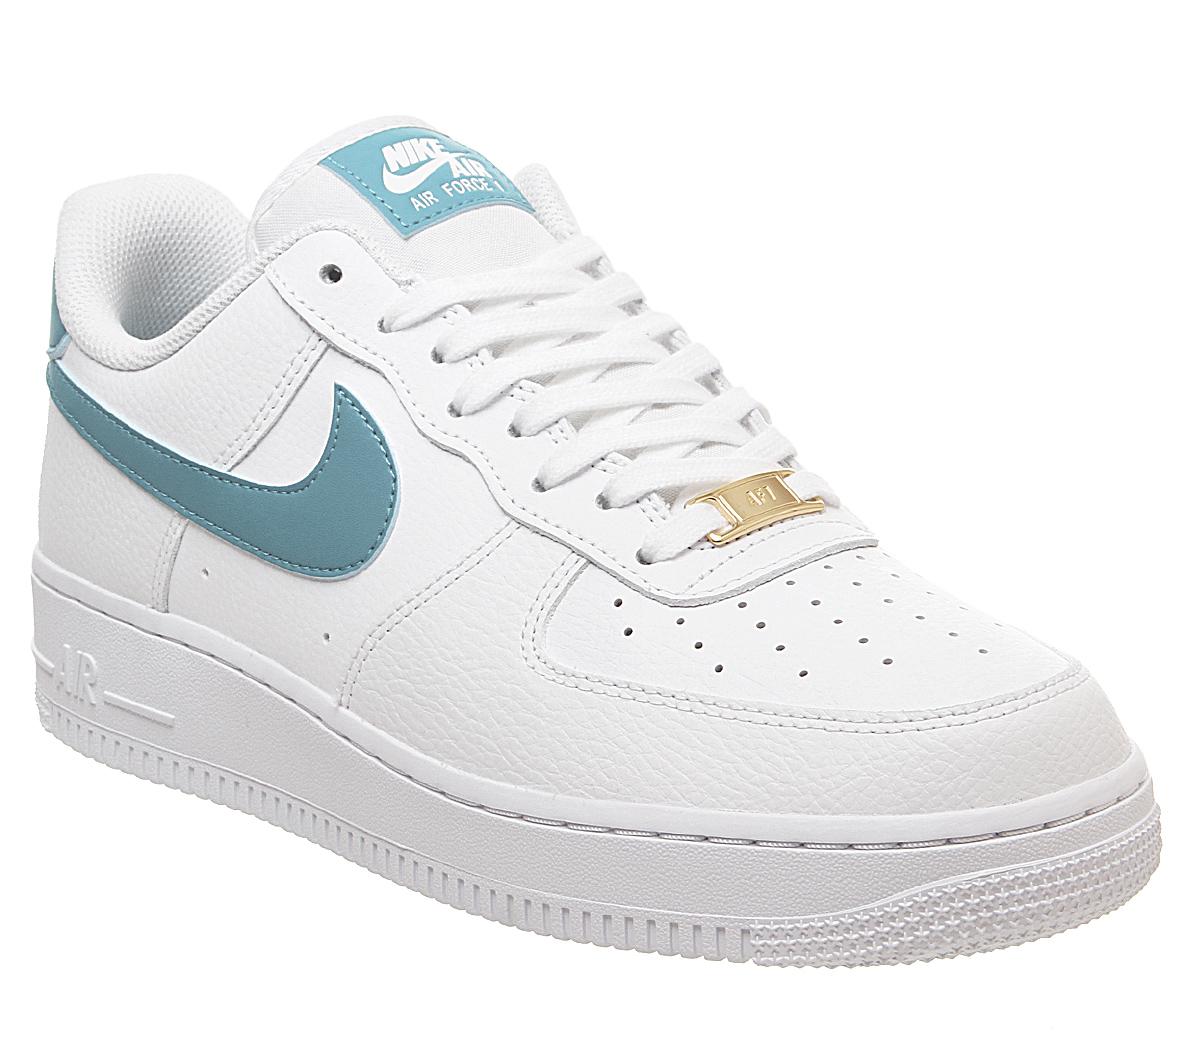 Nike Air Force 1 07 Trainers White Teal 